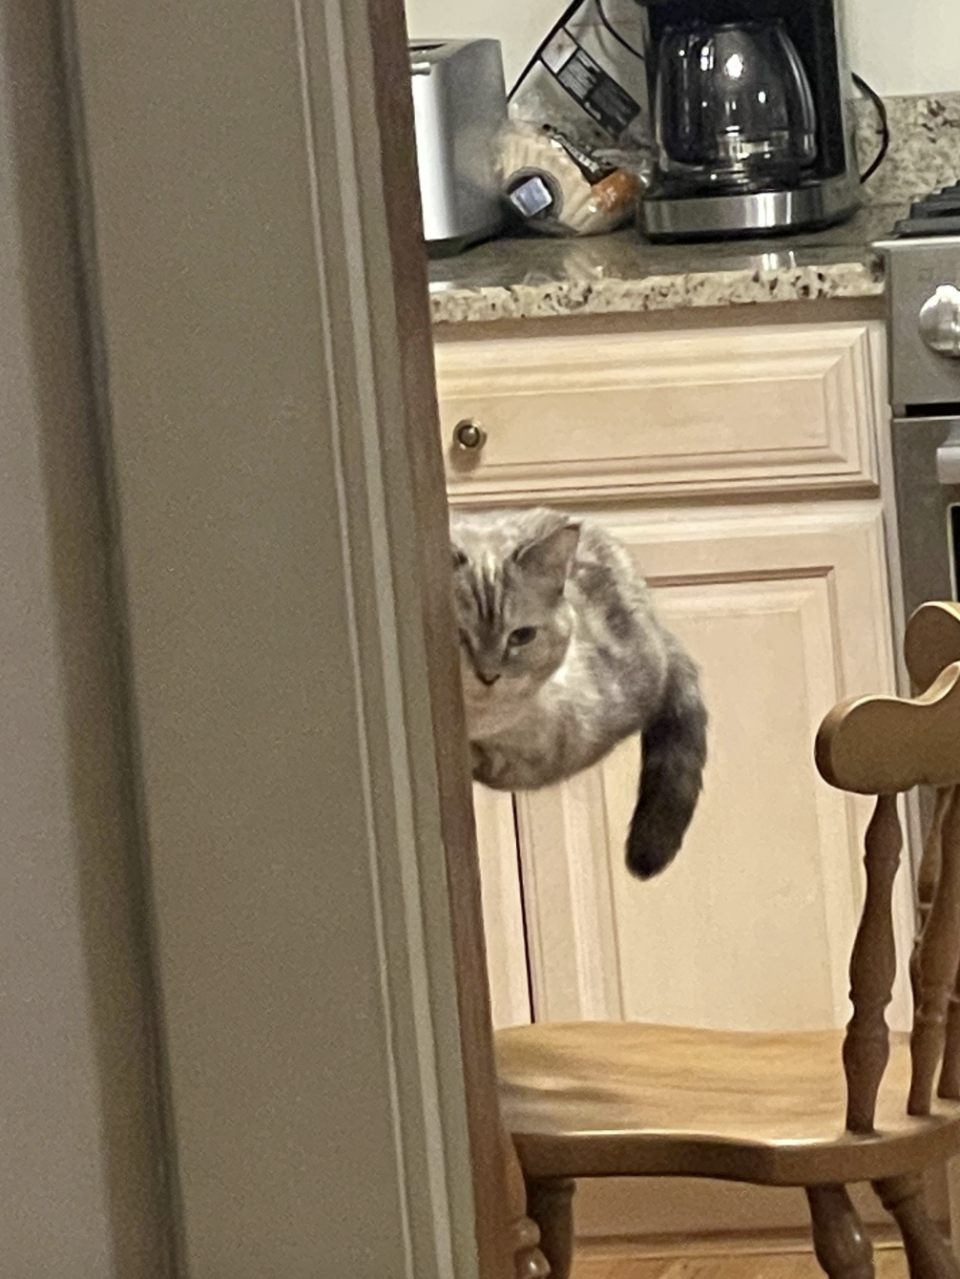 A cat is playfully peeking around a door frame into a kitchen, with its body mostly hidden and only its head and part of its tail visible